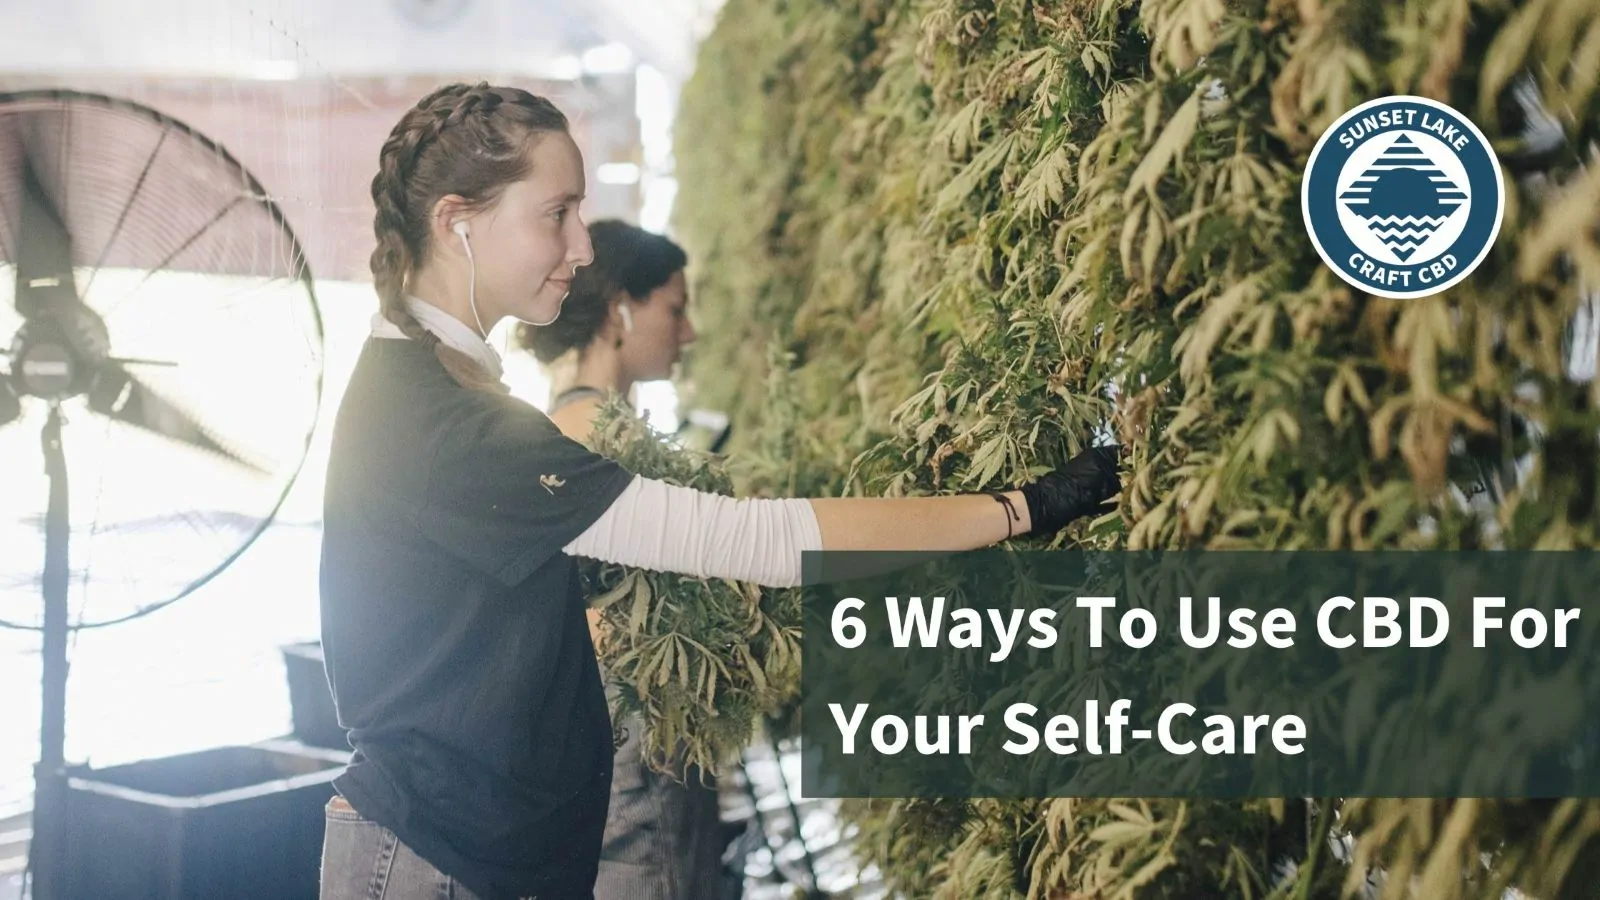 A woman hanging hemp flowers to dry. Text overlaid reads "6 ways to use CBD for your self-care"